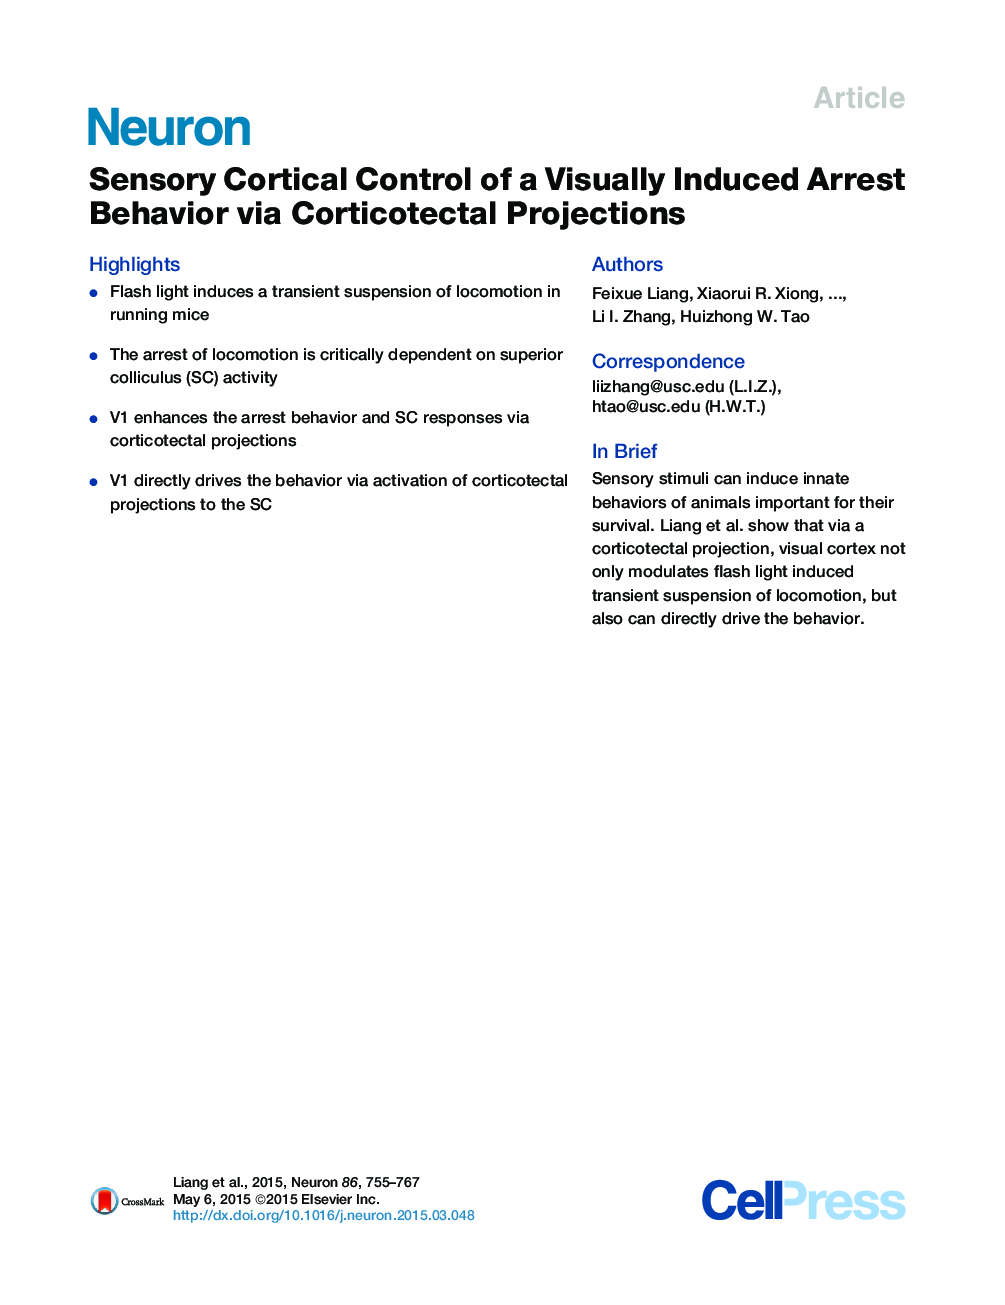 Sensory Cortical Control of a Visually Induced Arrest Behavior via Corticotectal Projections